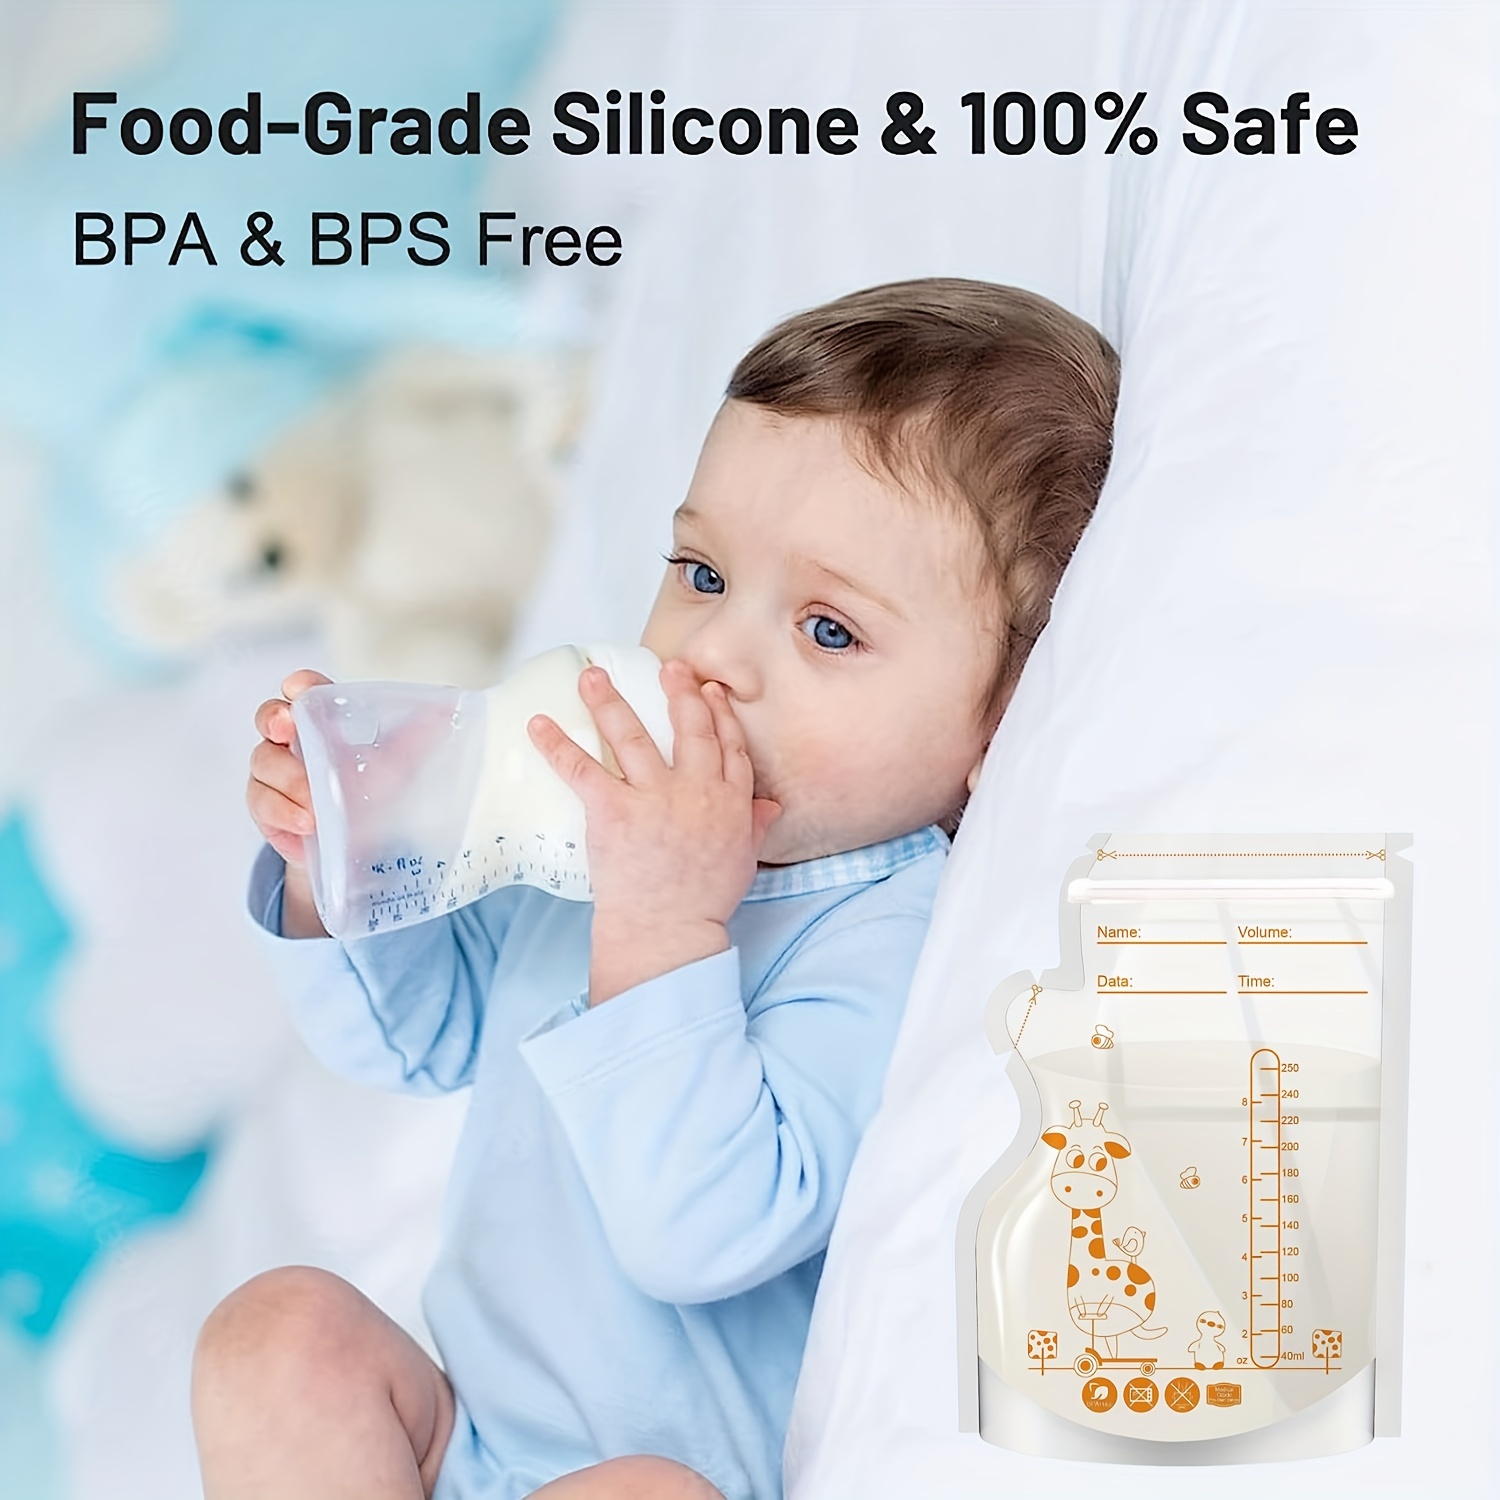 60pcs Breastmilk Storage Bags, 8.5oz Breast Milk Storing Bags, BPA Free,  Milk Storage Bags With Pour Spout For Breastfeeding, Ready To Use Breastmilk